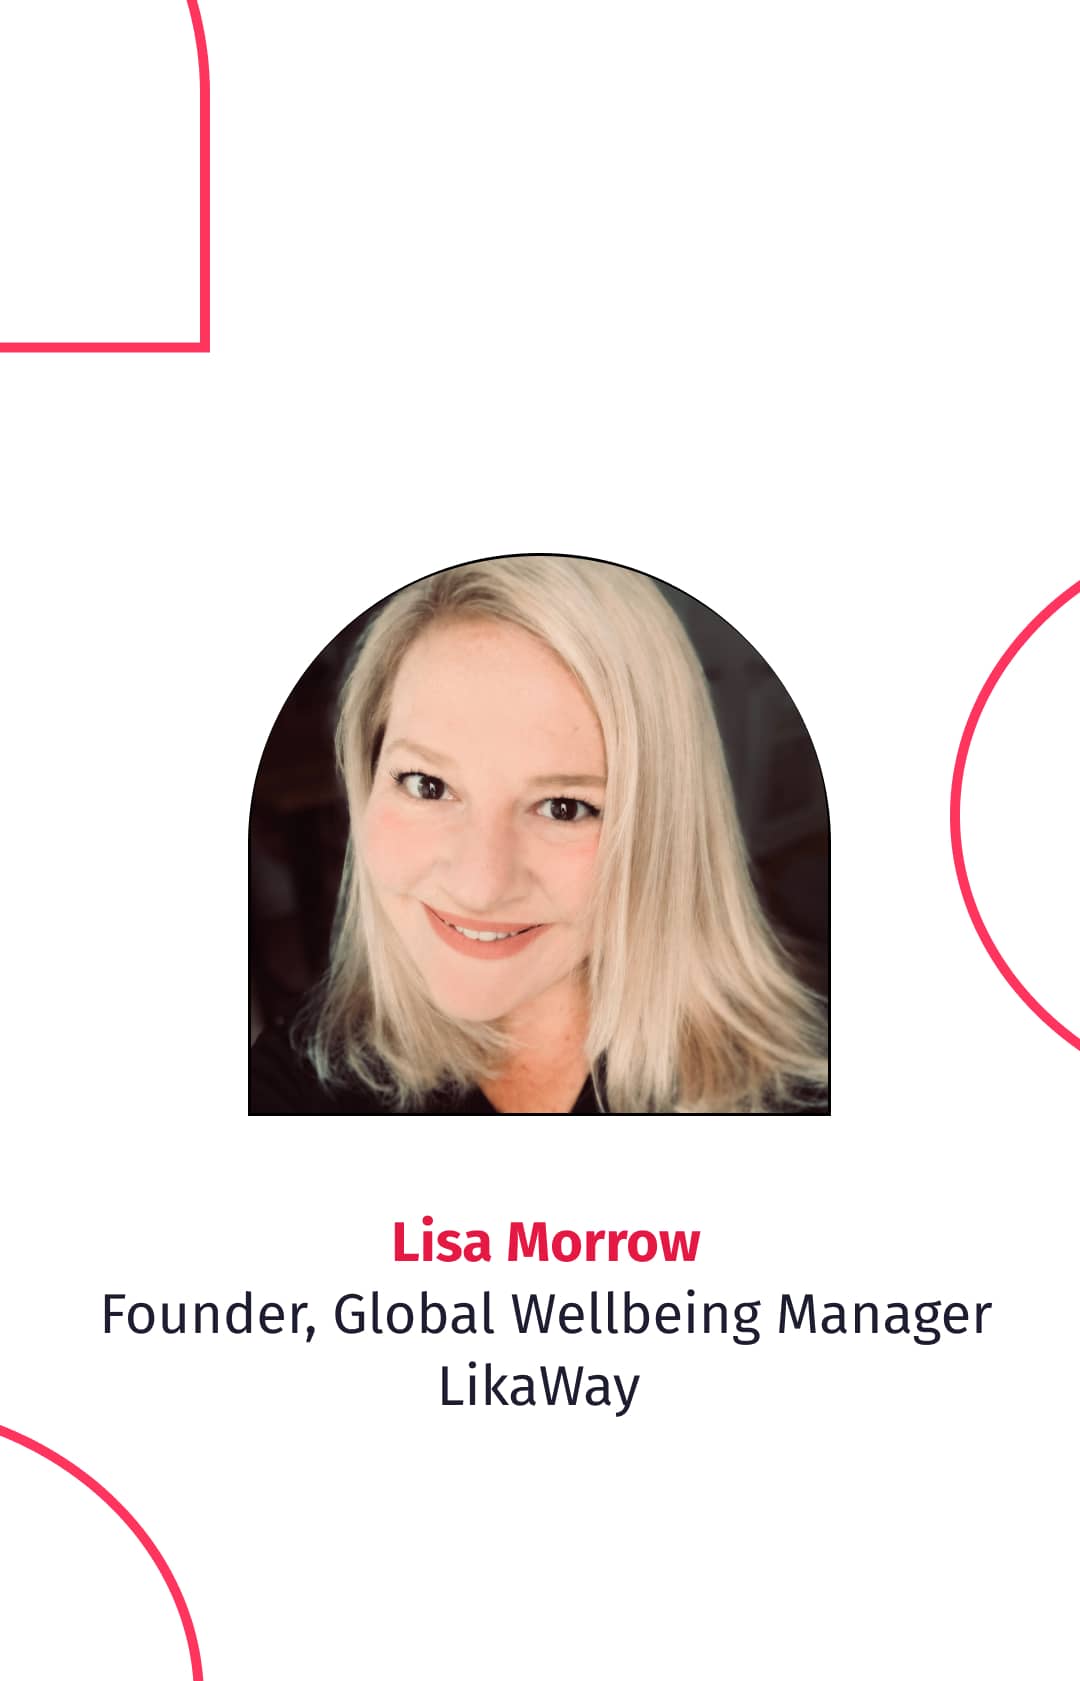 Lisa Morrow: Founder & Global Wellbeing Manager